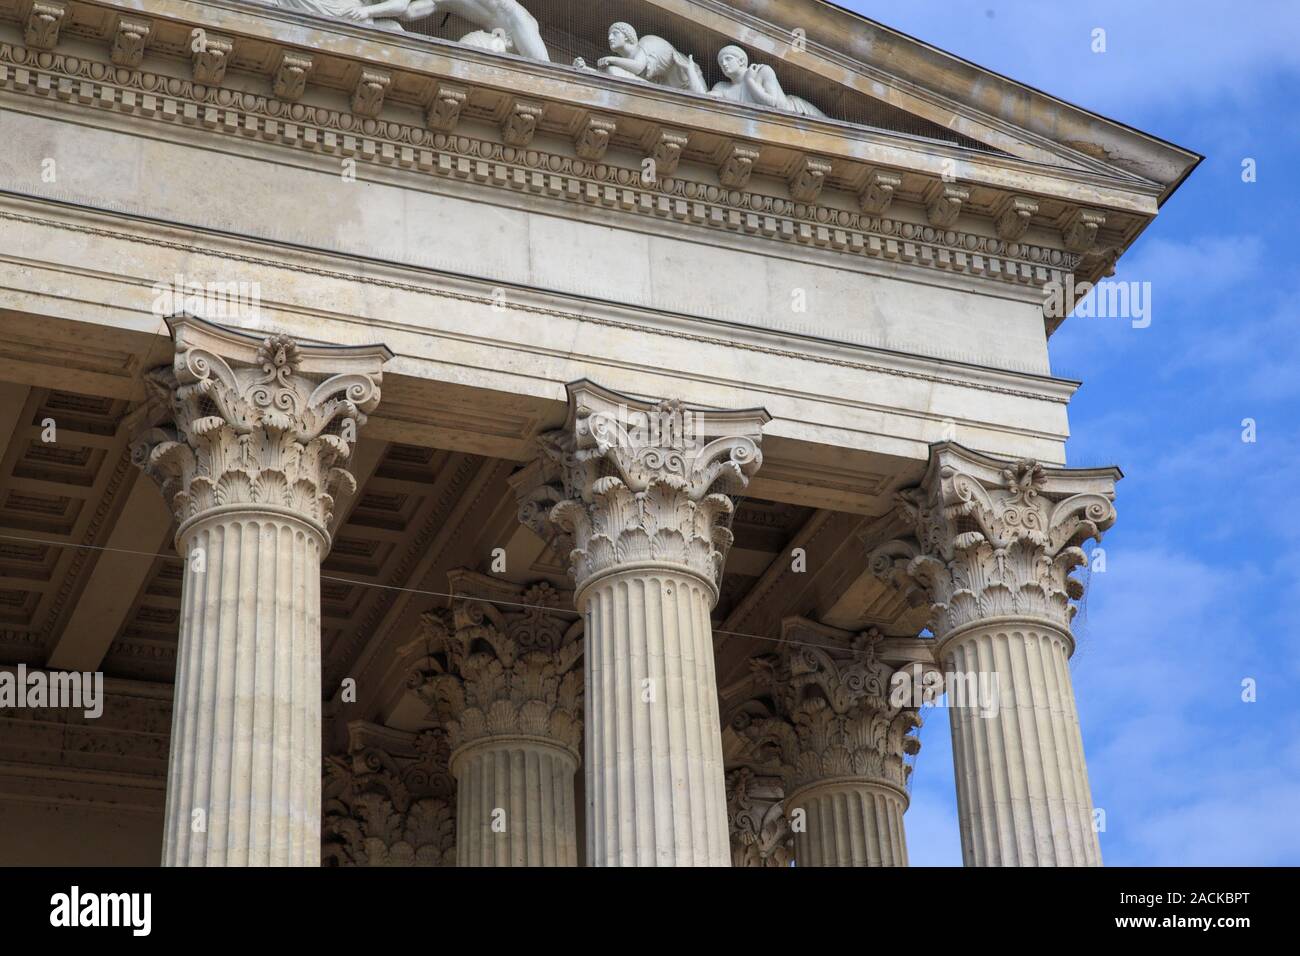 Vintage Old Justice Courthouse Column. Neoclassical colonnade with corinthian columns as part of a public building resembling a Greek or Roman temple. Stock Photo